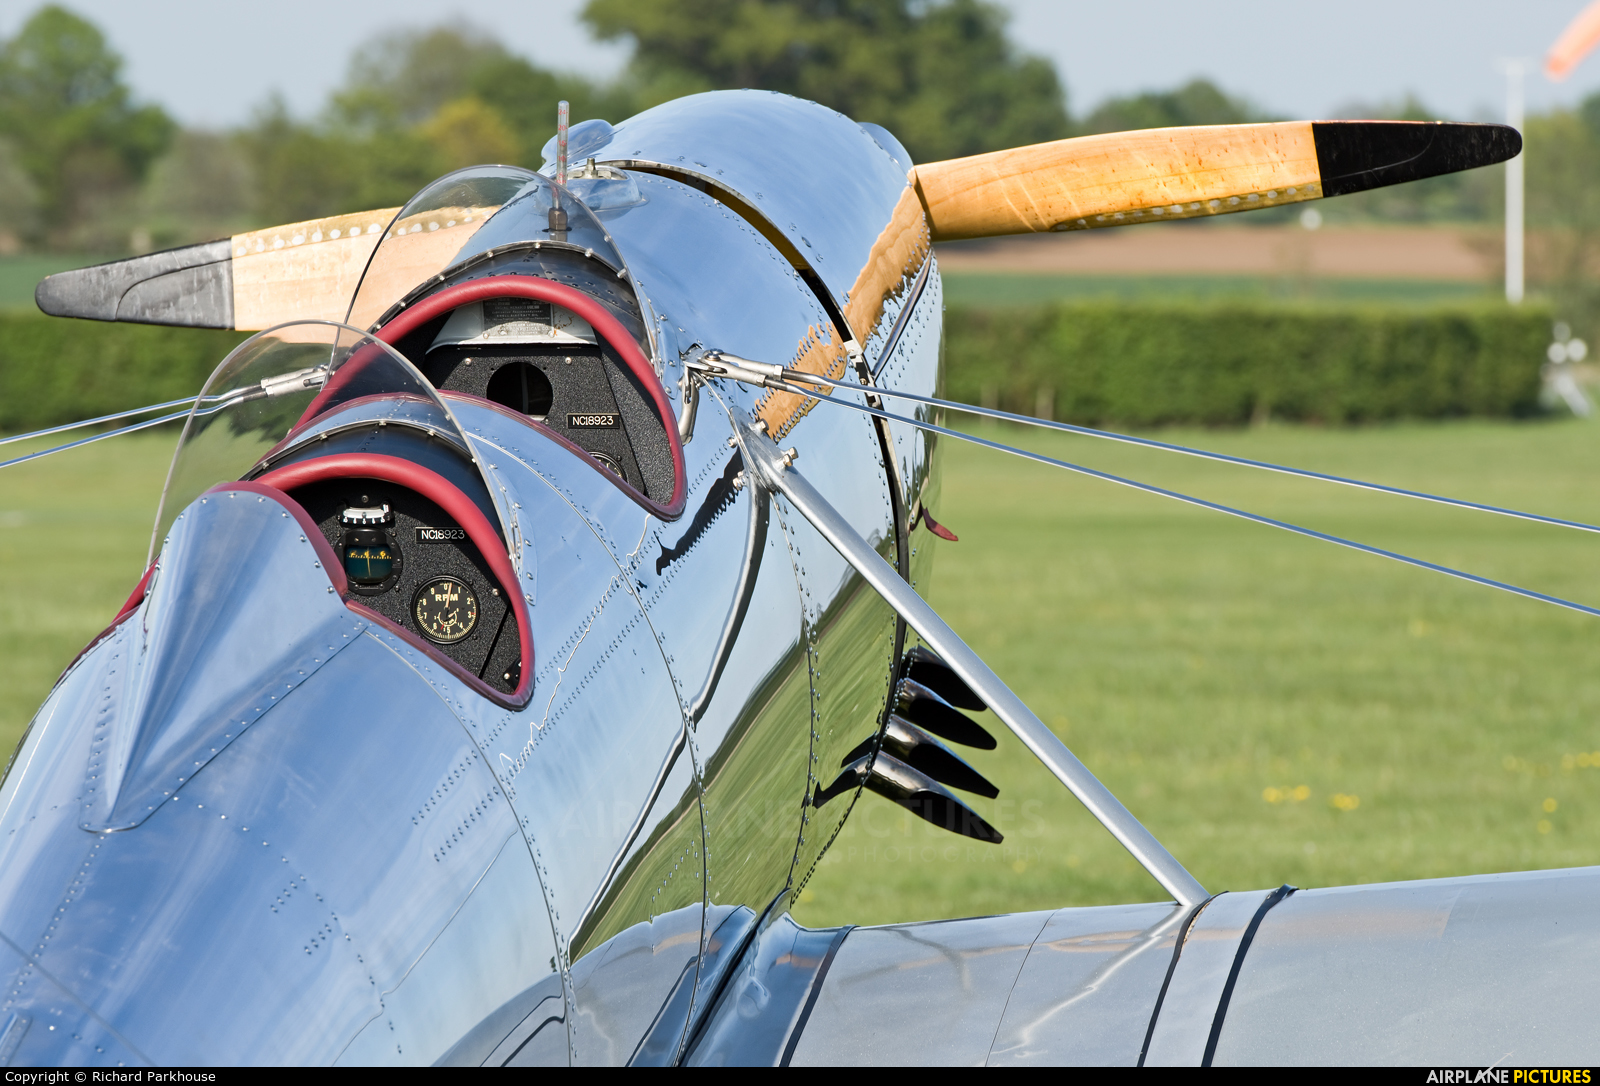 Private NC18923 aircraft at Old Warden